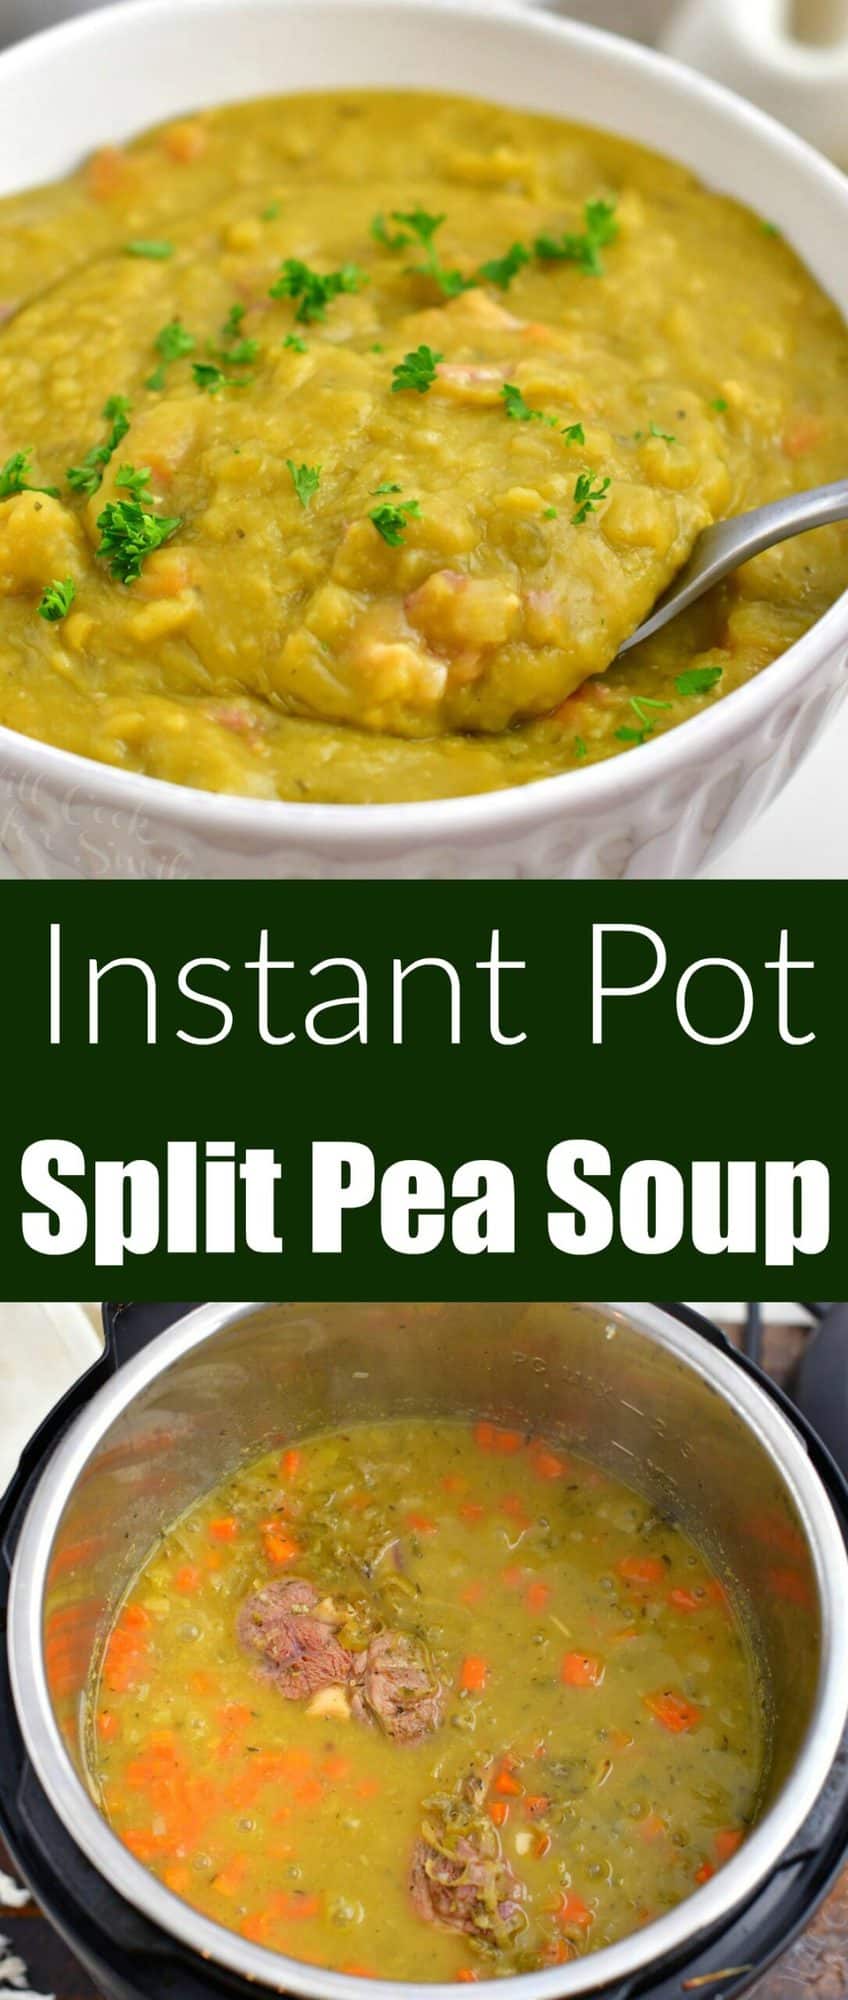 titled image (and shown in a bowl): Instant Pot split pea soup